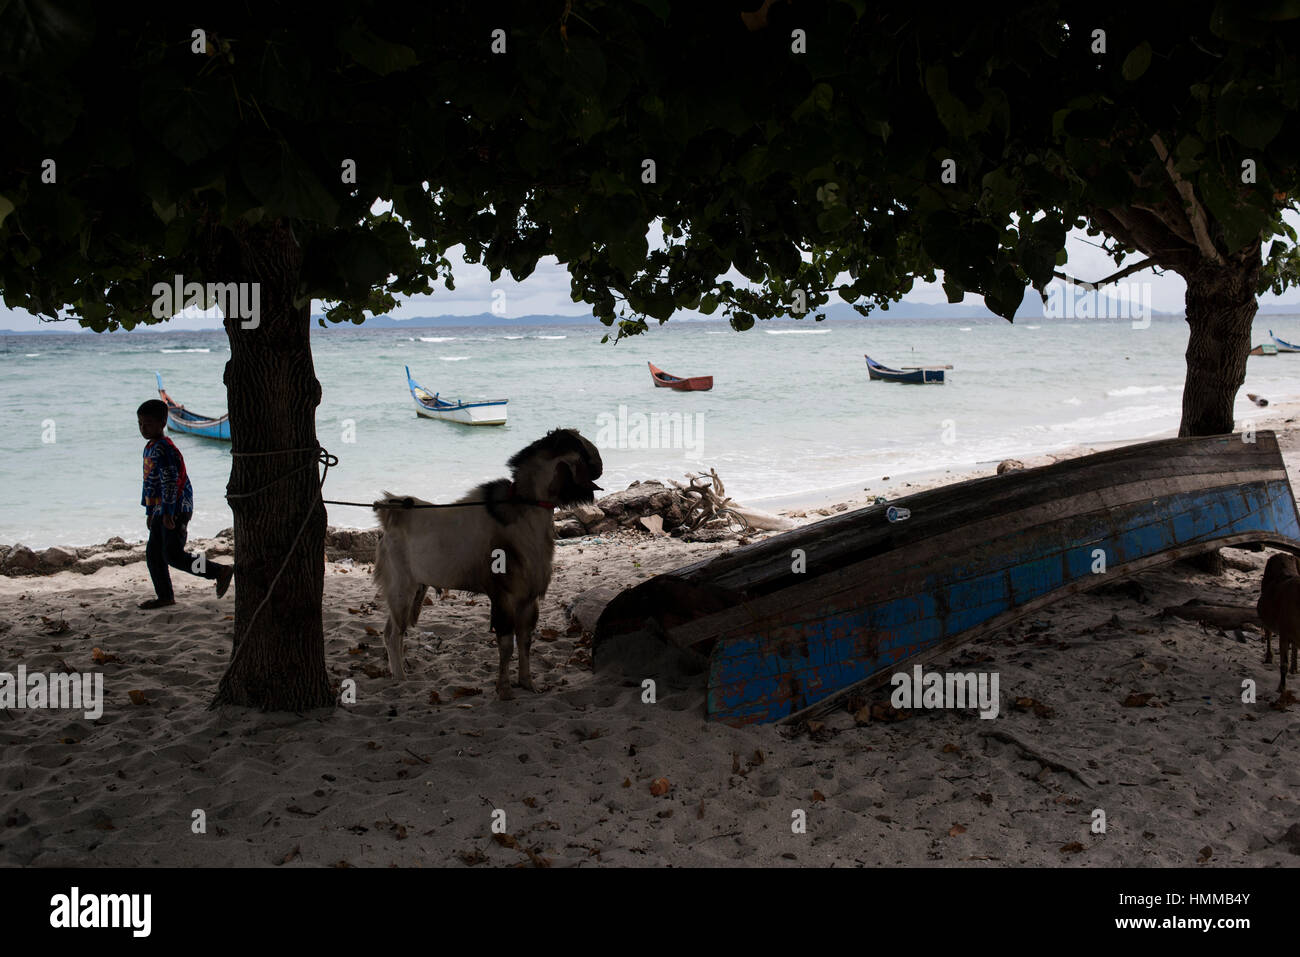 A goat tied up on a tree in tropical beach of Pulau Weh, Banda Aceh, Sumatra, Indonesia. Stock Photo